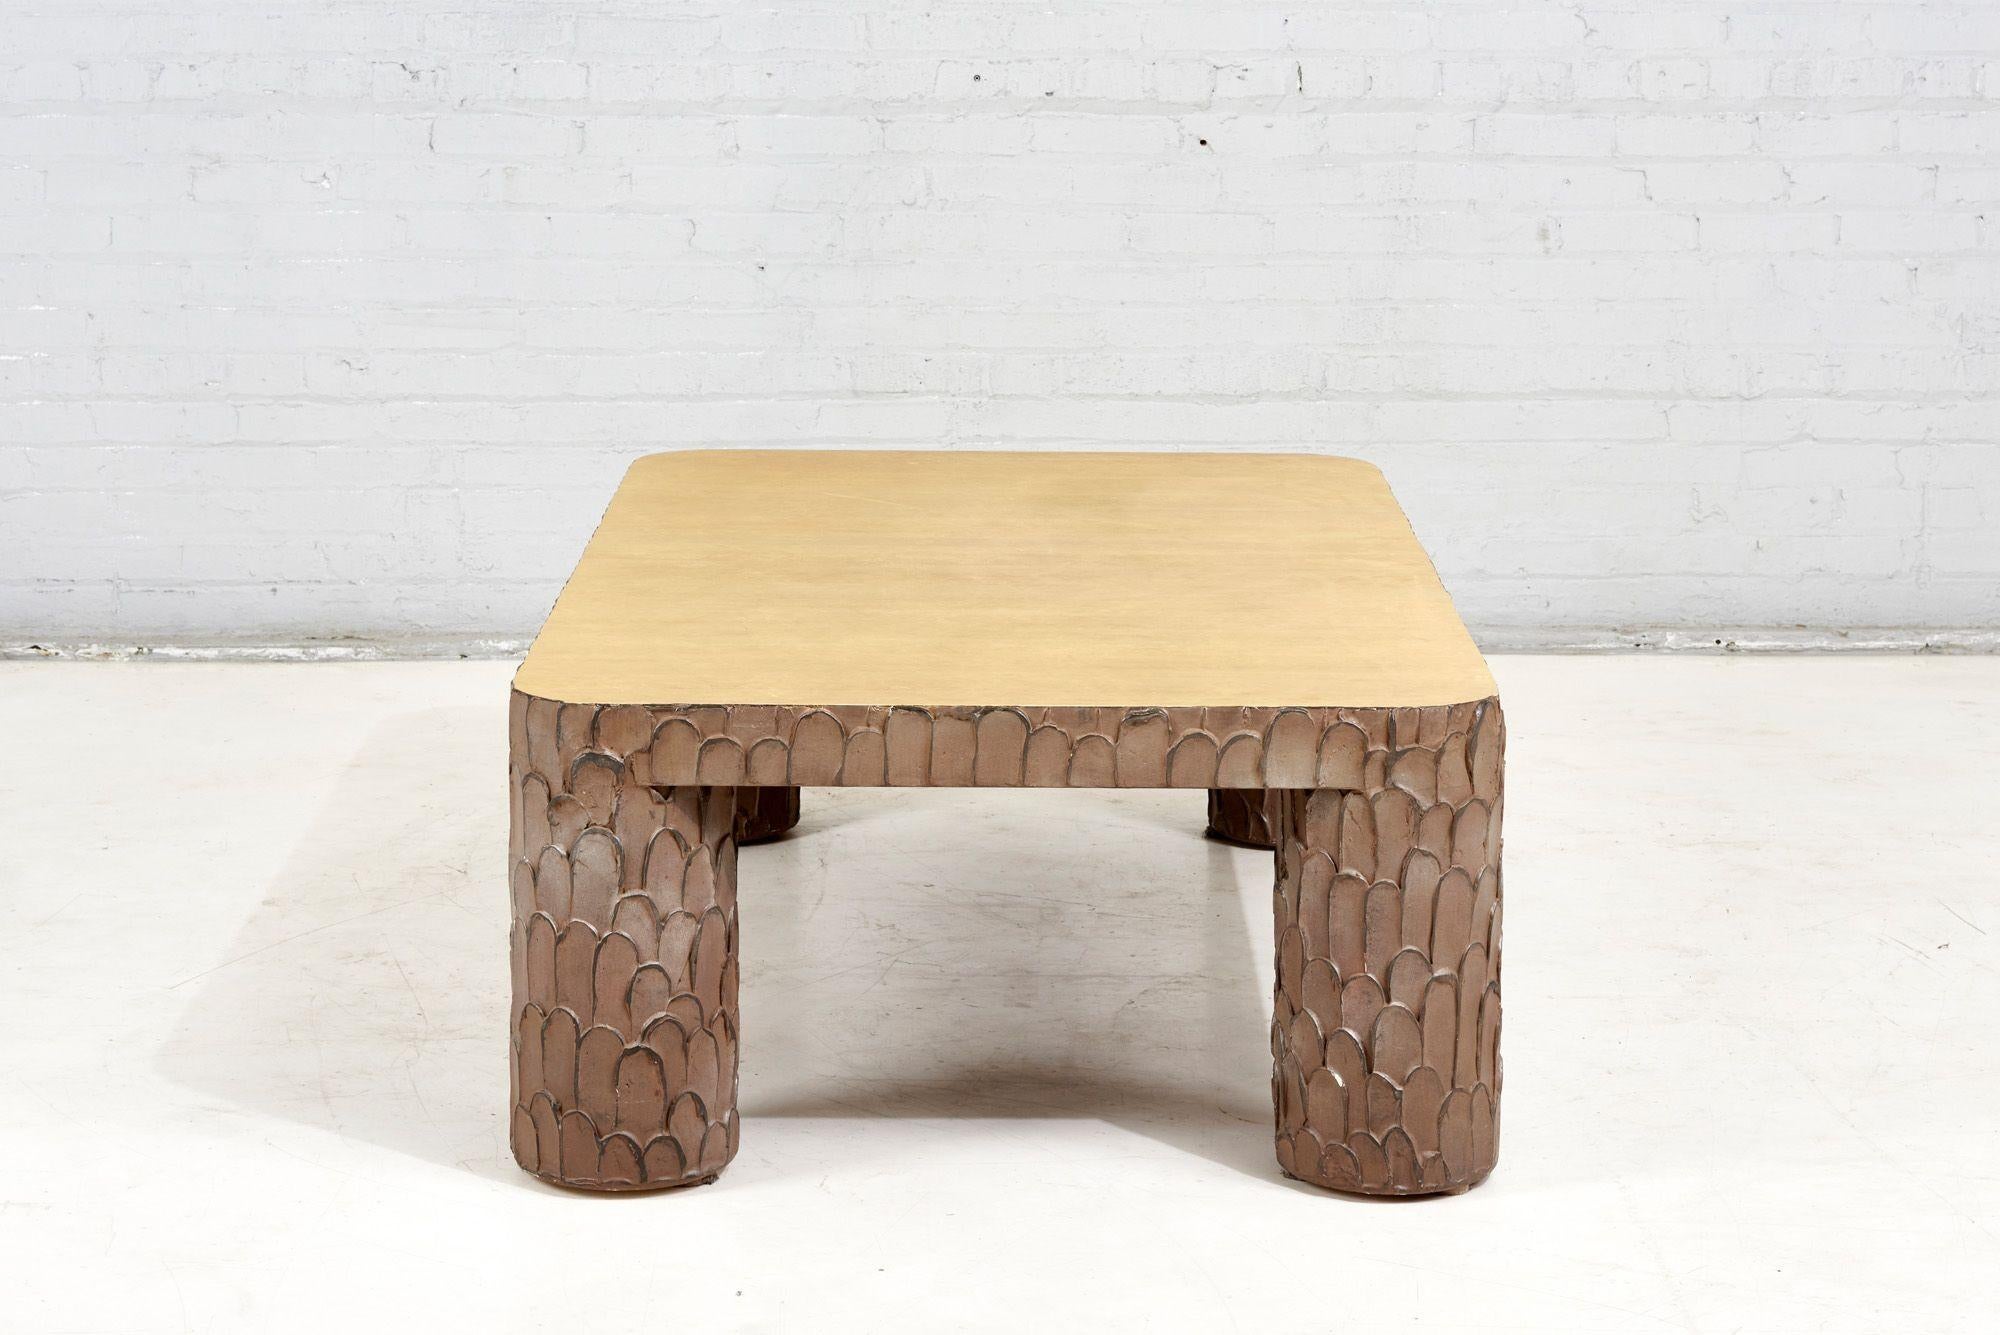 American Post Modern Sculptural Plaster Coffee Table, 1970 For Sale